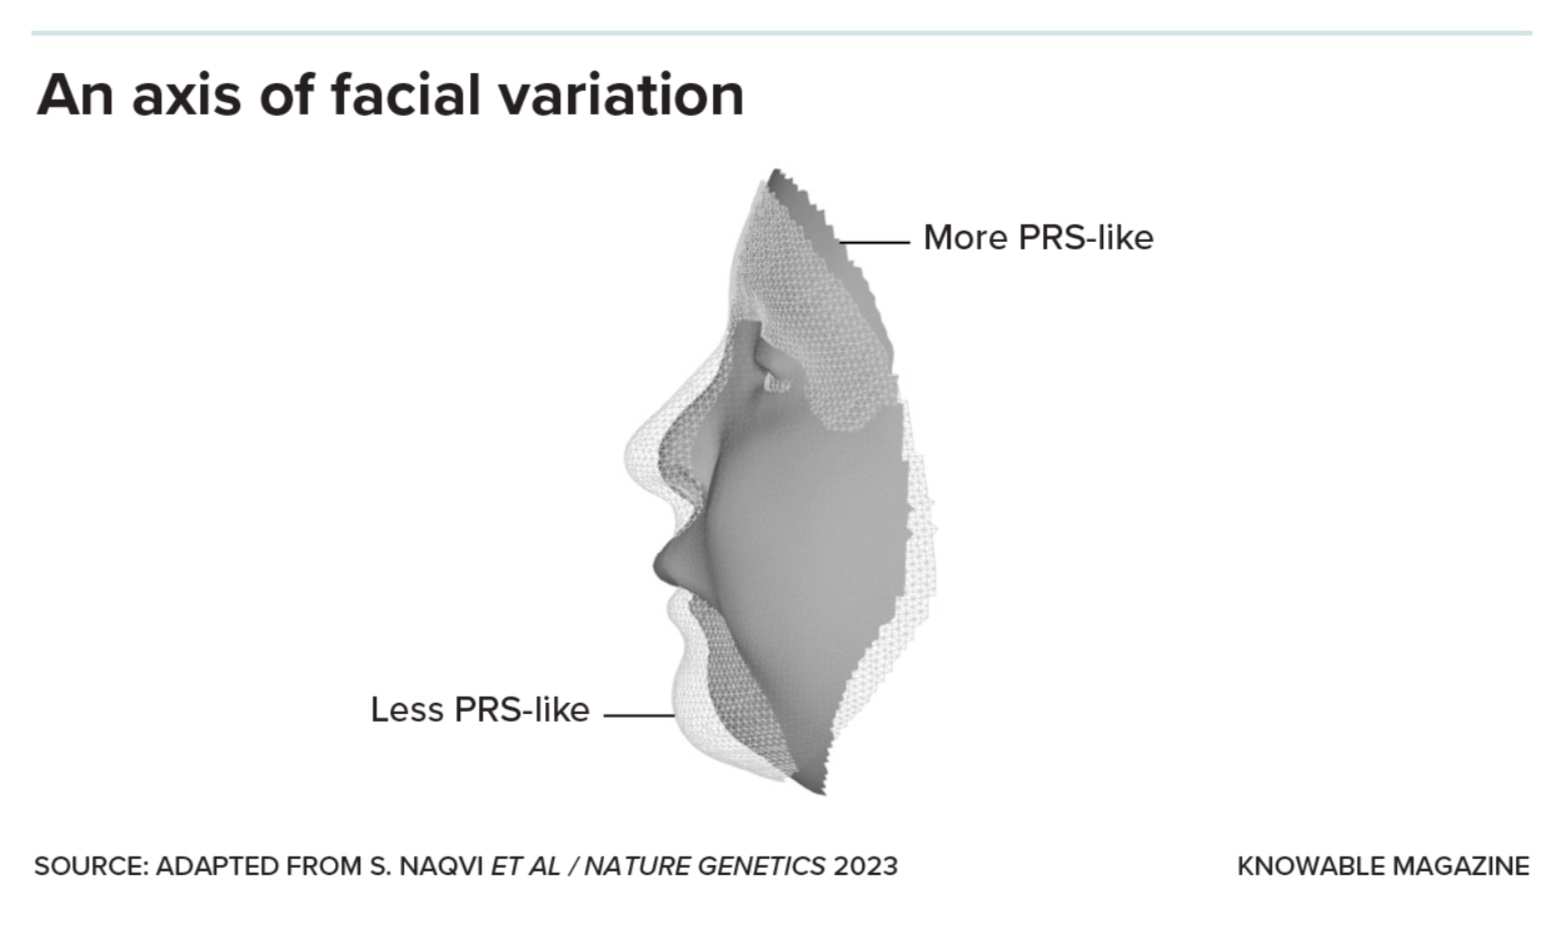 An axes of genetic facial variation that influences family resemblance.